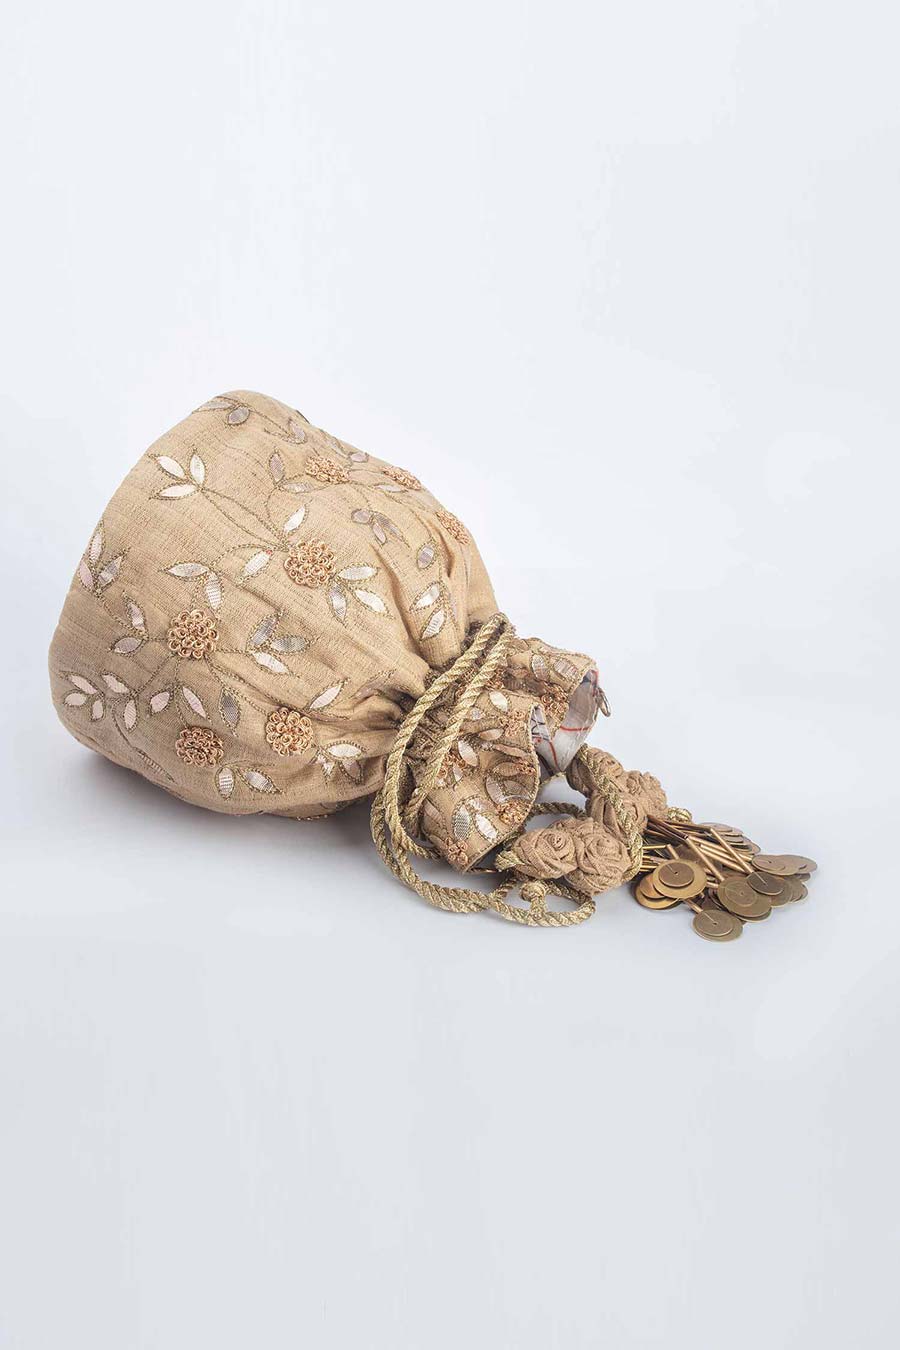 Floral Hand Embroidered Gold Potli